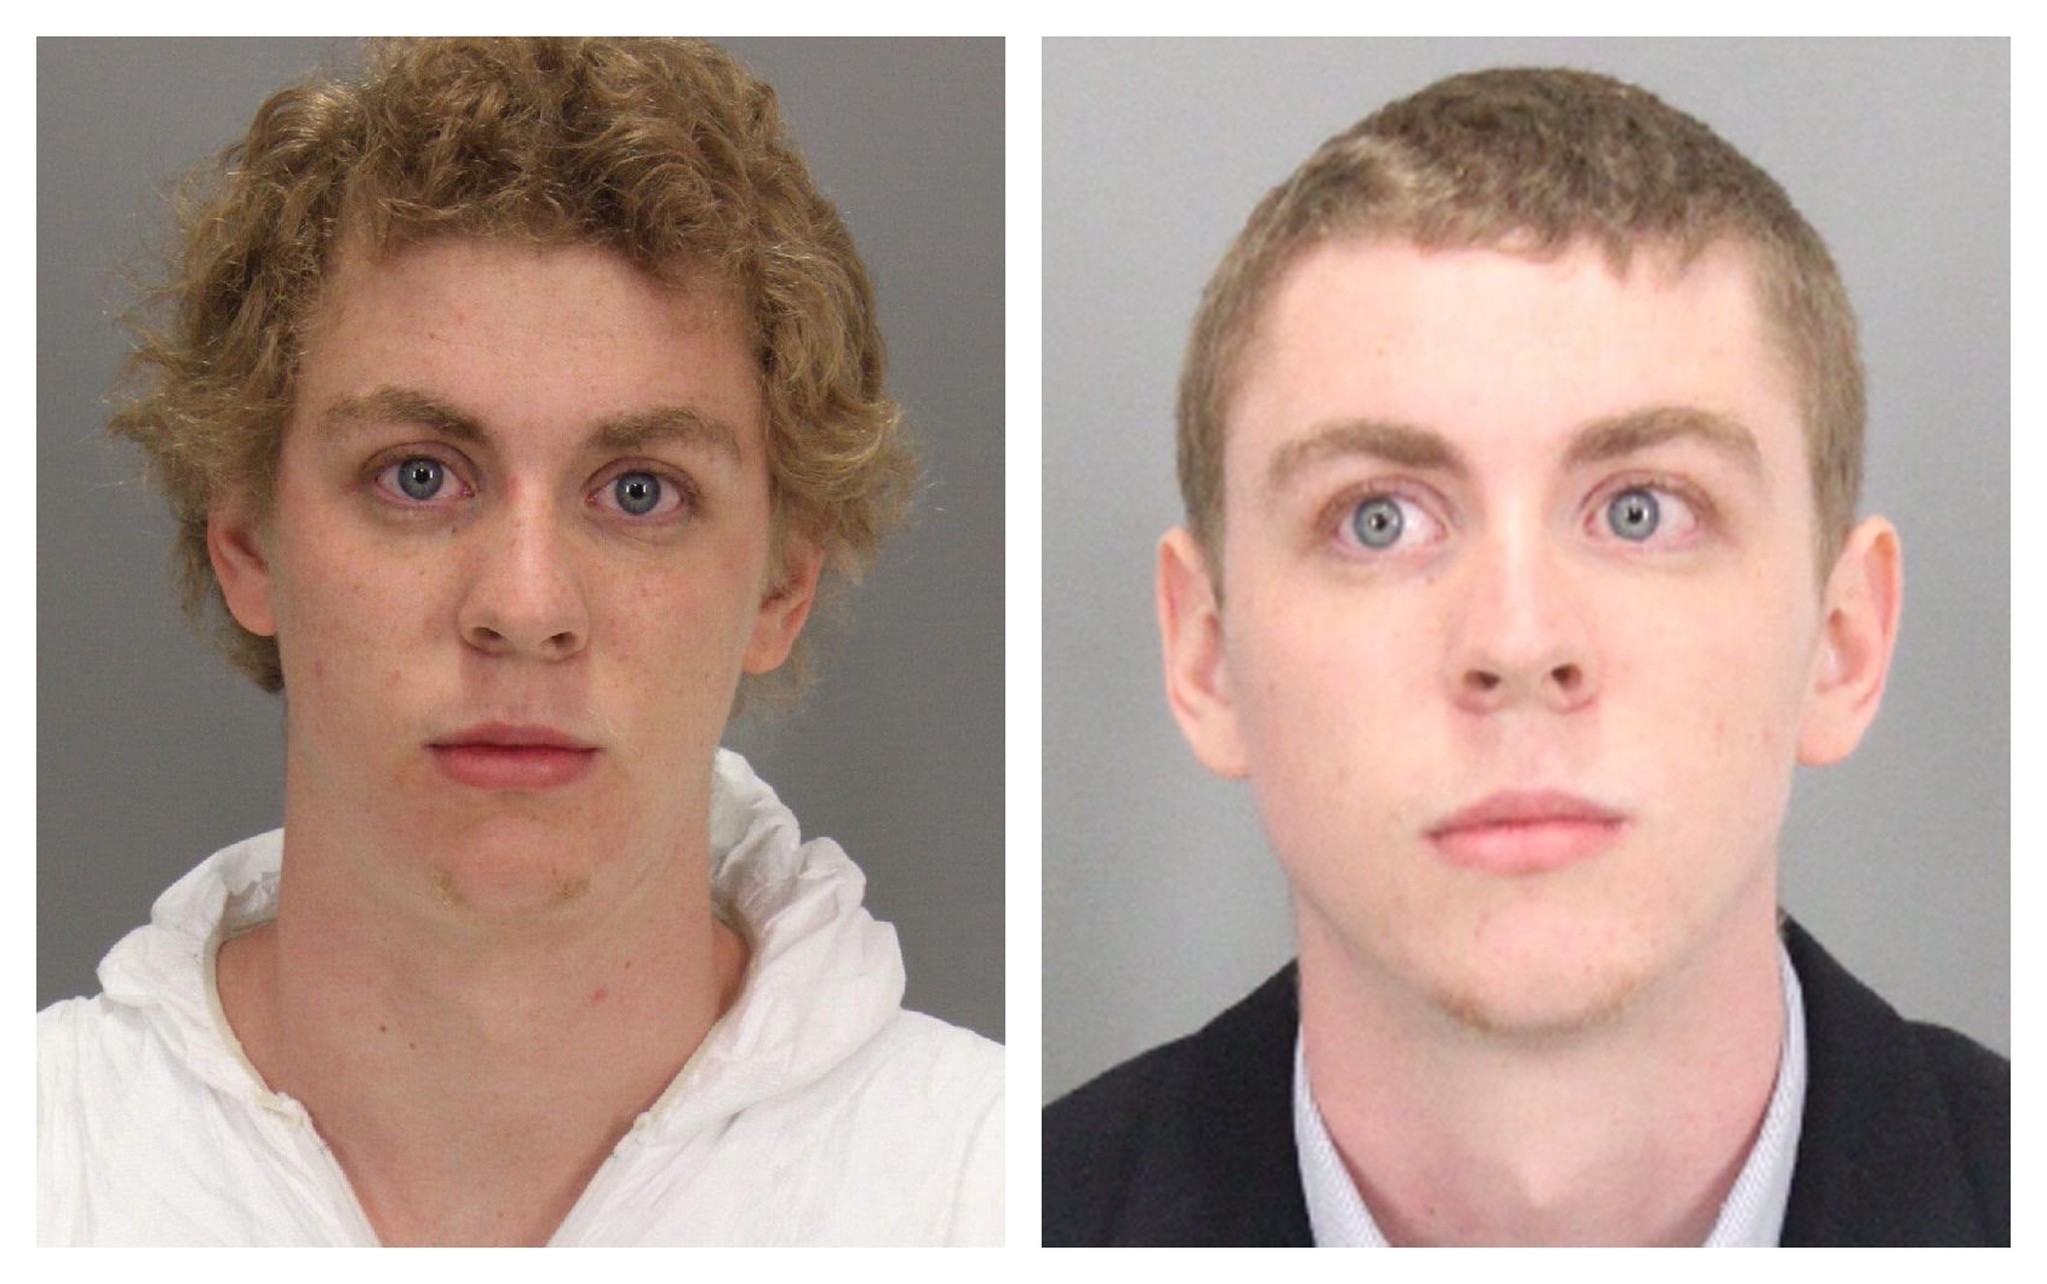 A combination booking photos shows former Stanford University student Brock Turner (L) on January 18, 2015 at the time of arrest and after Turner was sentenced to six months in county jail. (REUTERS Photo)